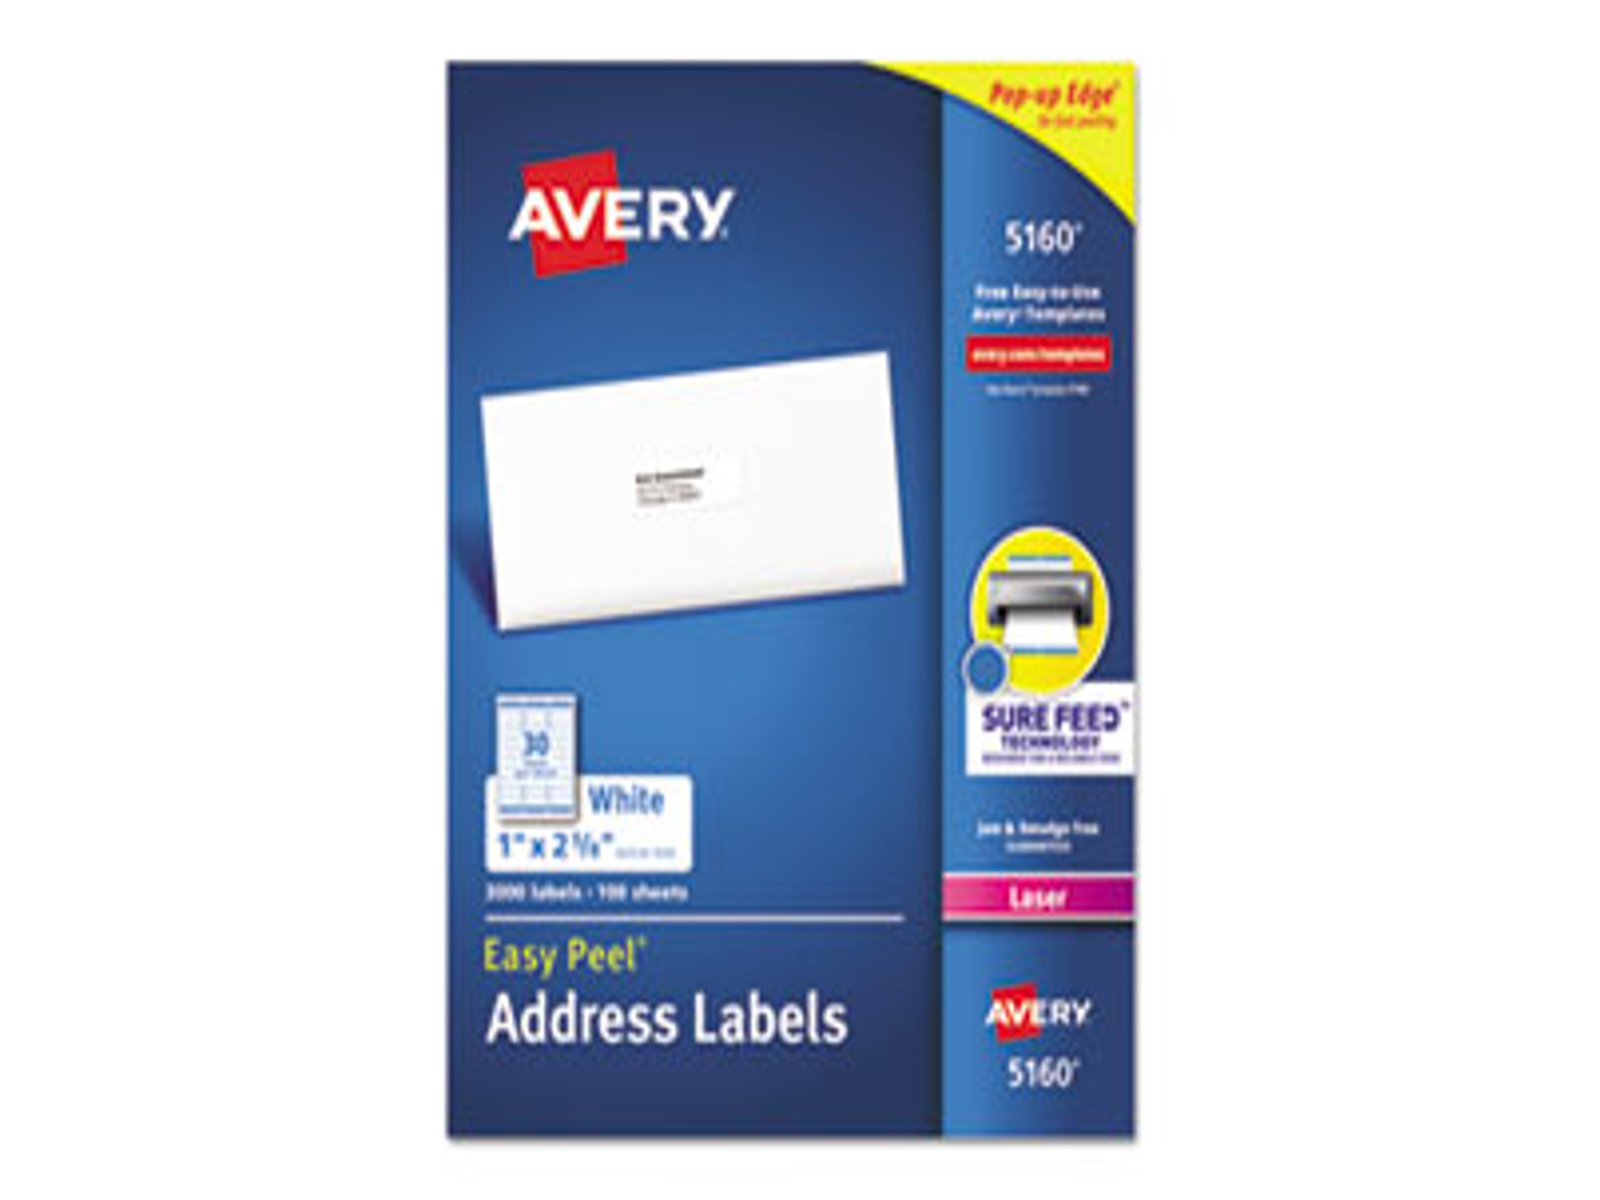 AVERY PRODUCTS EASY PEEL WHITE
ADDRESS LABELS W/SURE FEED
TECHNOLOGY, LASER PRINTER, 1 X
2.63, WHITE, 30/SHEETS, 100
SHEETS/BOX